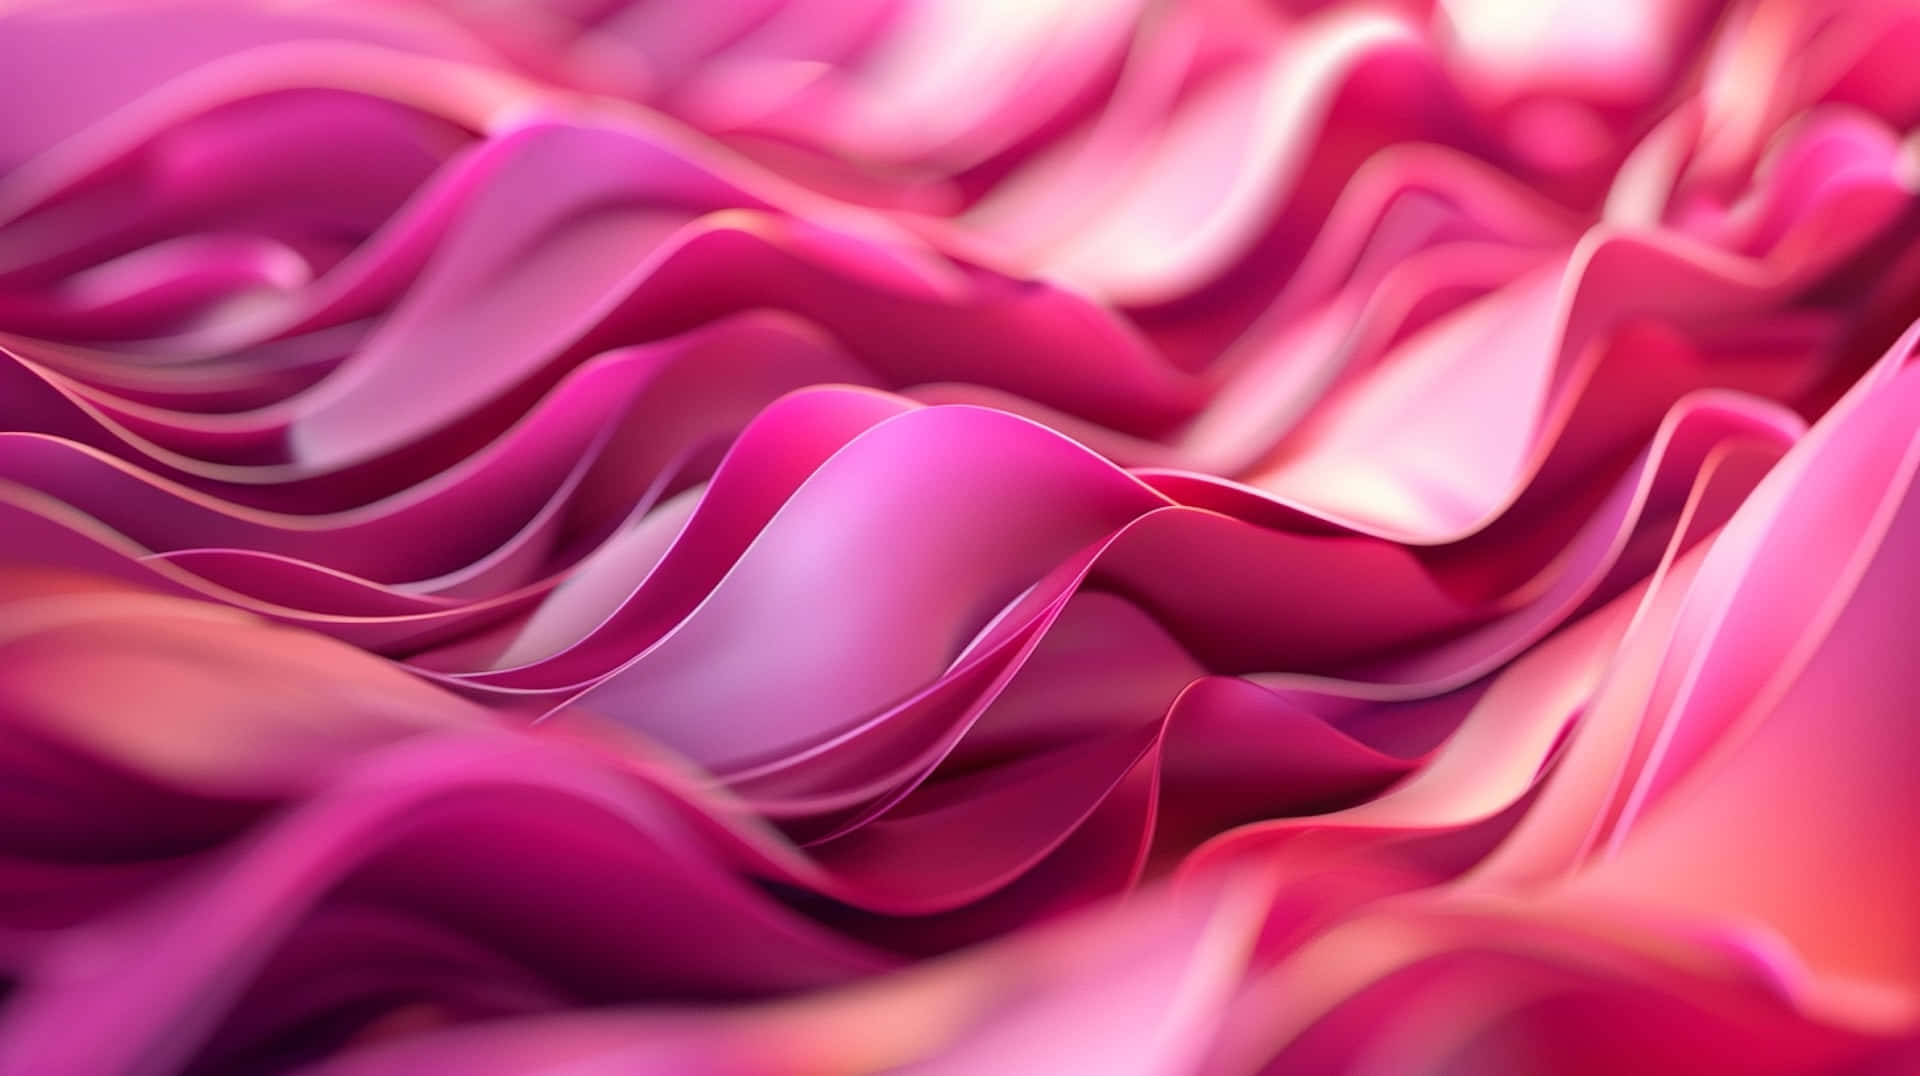 Abstract Pink Waves3 D Background Wallpaper